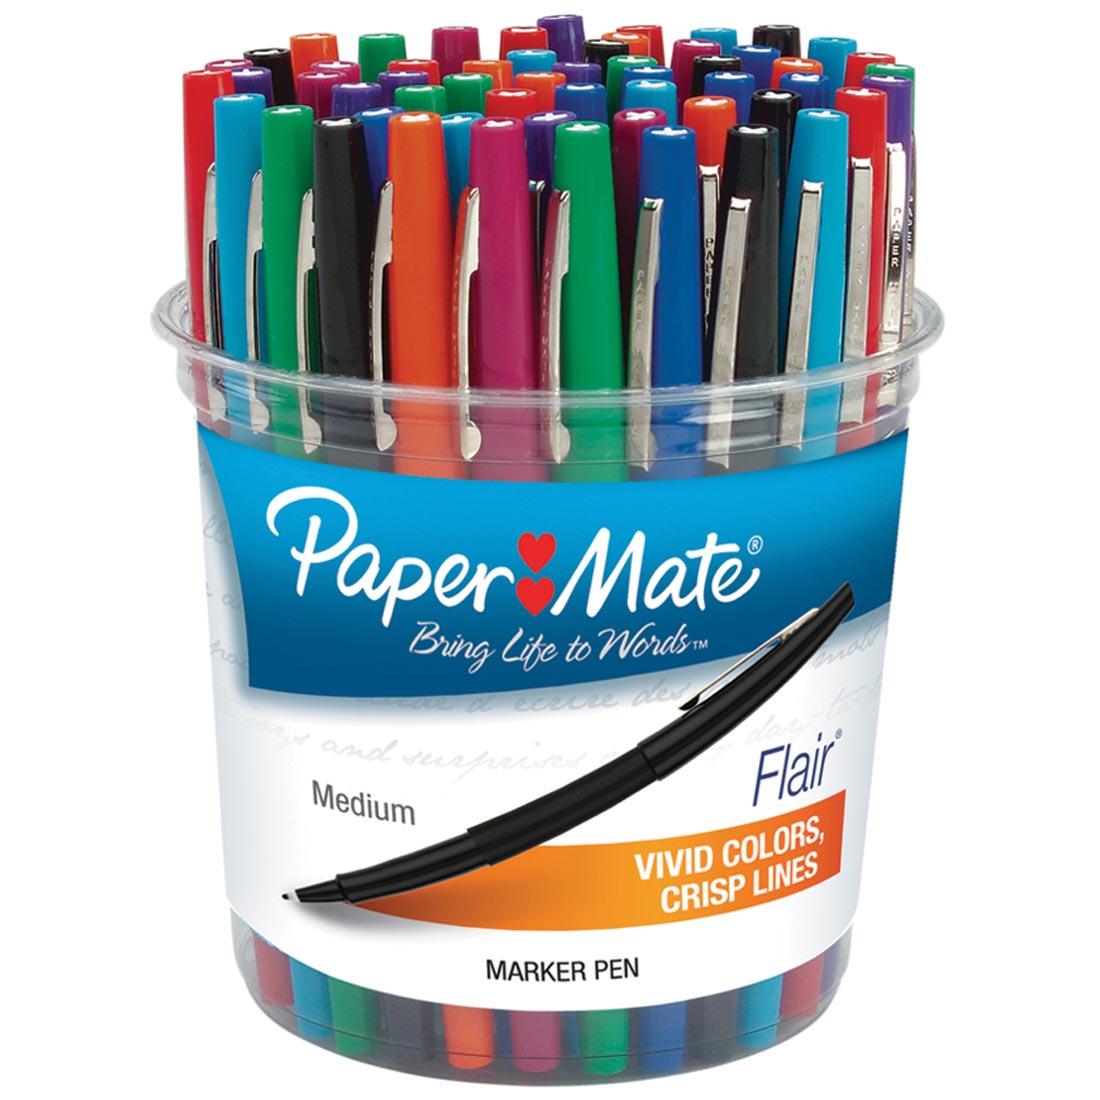 48 Paper Mate Flair Pens in a Plastic Tub